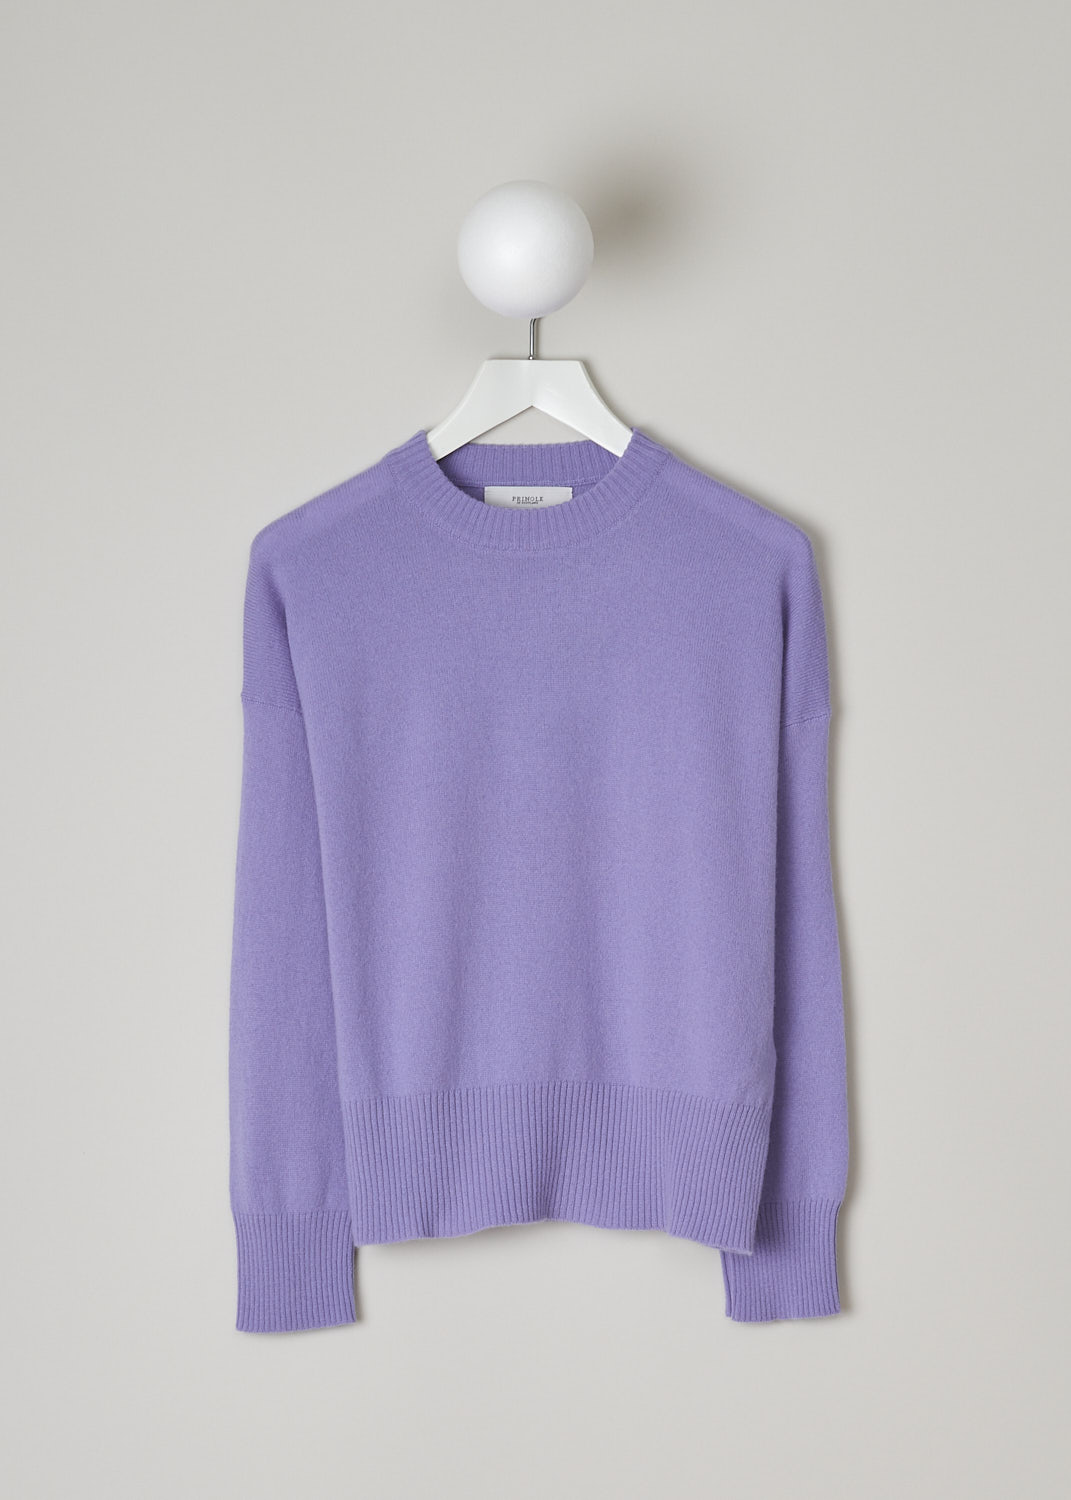 PRINGLE OF SCOTLAND, LAVENDER CASHMERE SWEATER, PWF819_2624_LAVENDER, Purple, Front, This lavender cashmere sweater had a ribbed round neckline. The cuffs and hemline have that same ribbed finish.  
